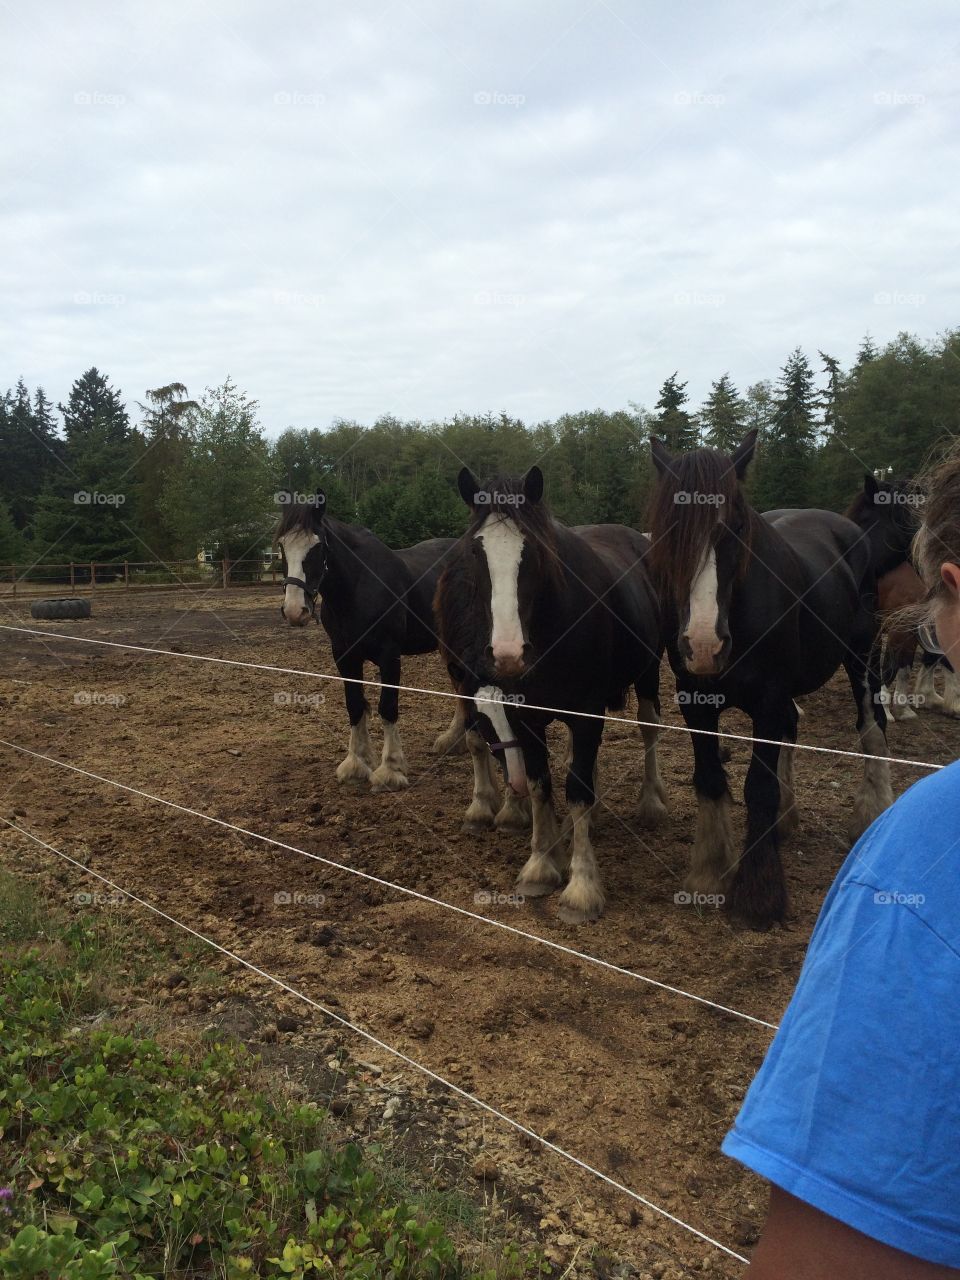 Stand in line. Horses with an electric fence come to say hi!